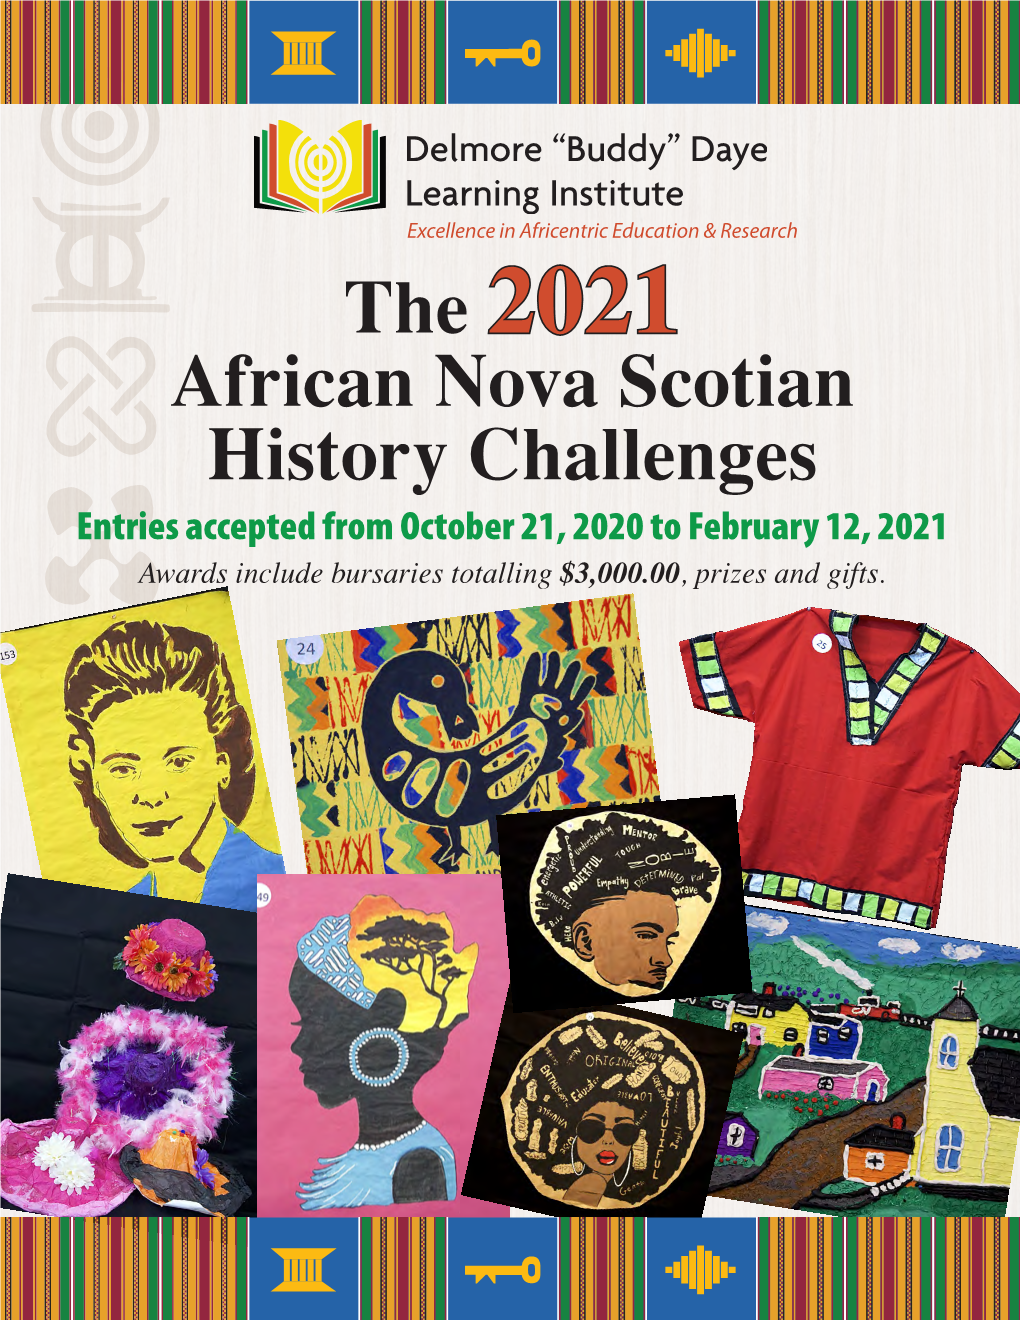 The 2021 African Nova Scotian History Challenges